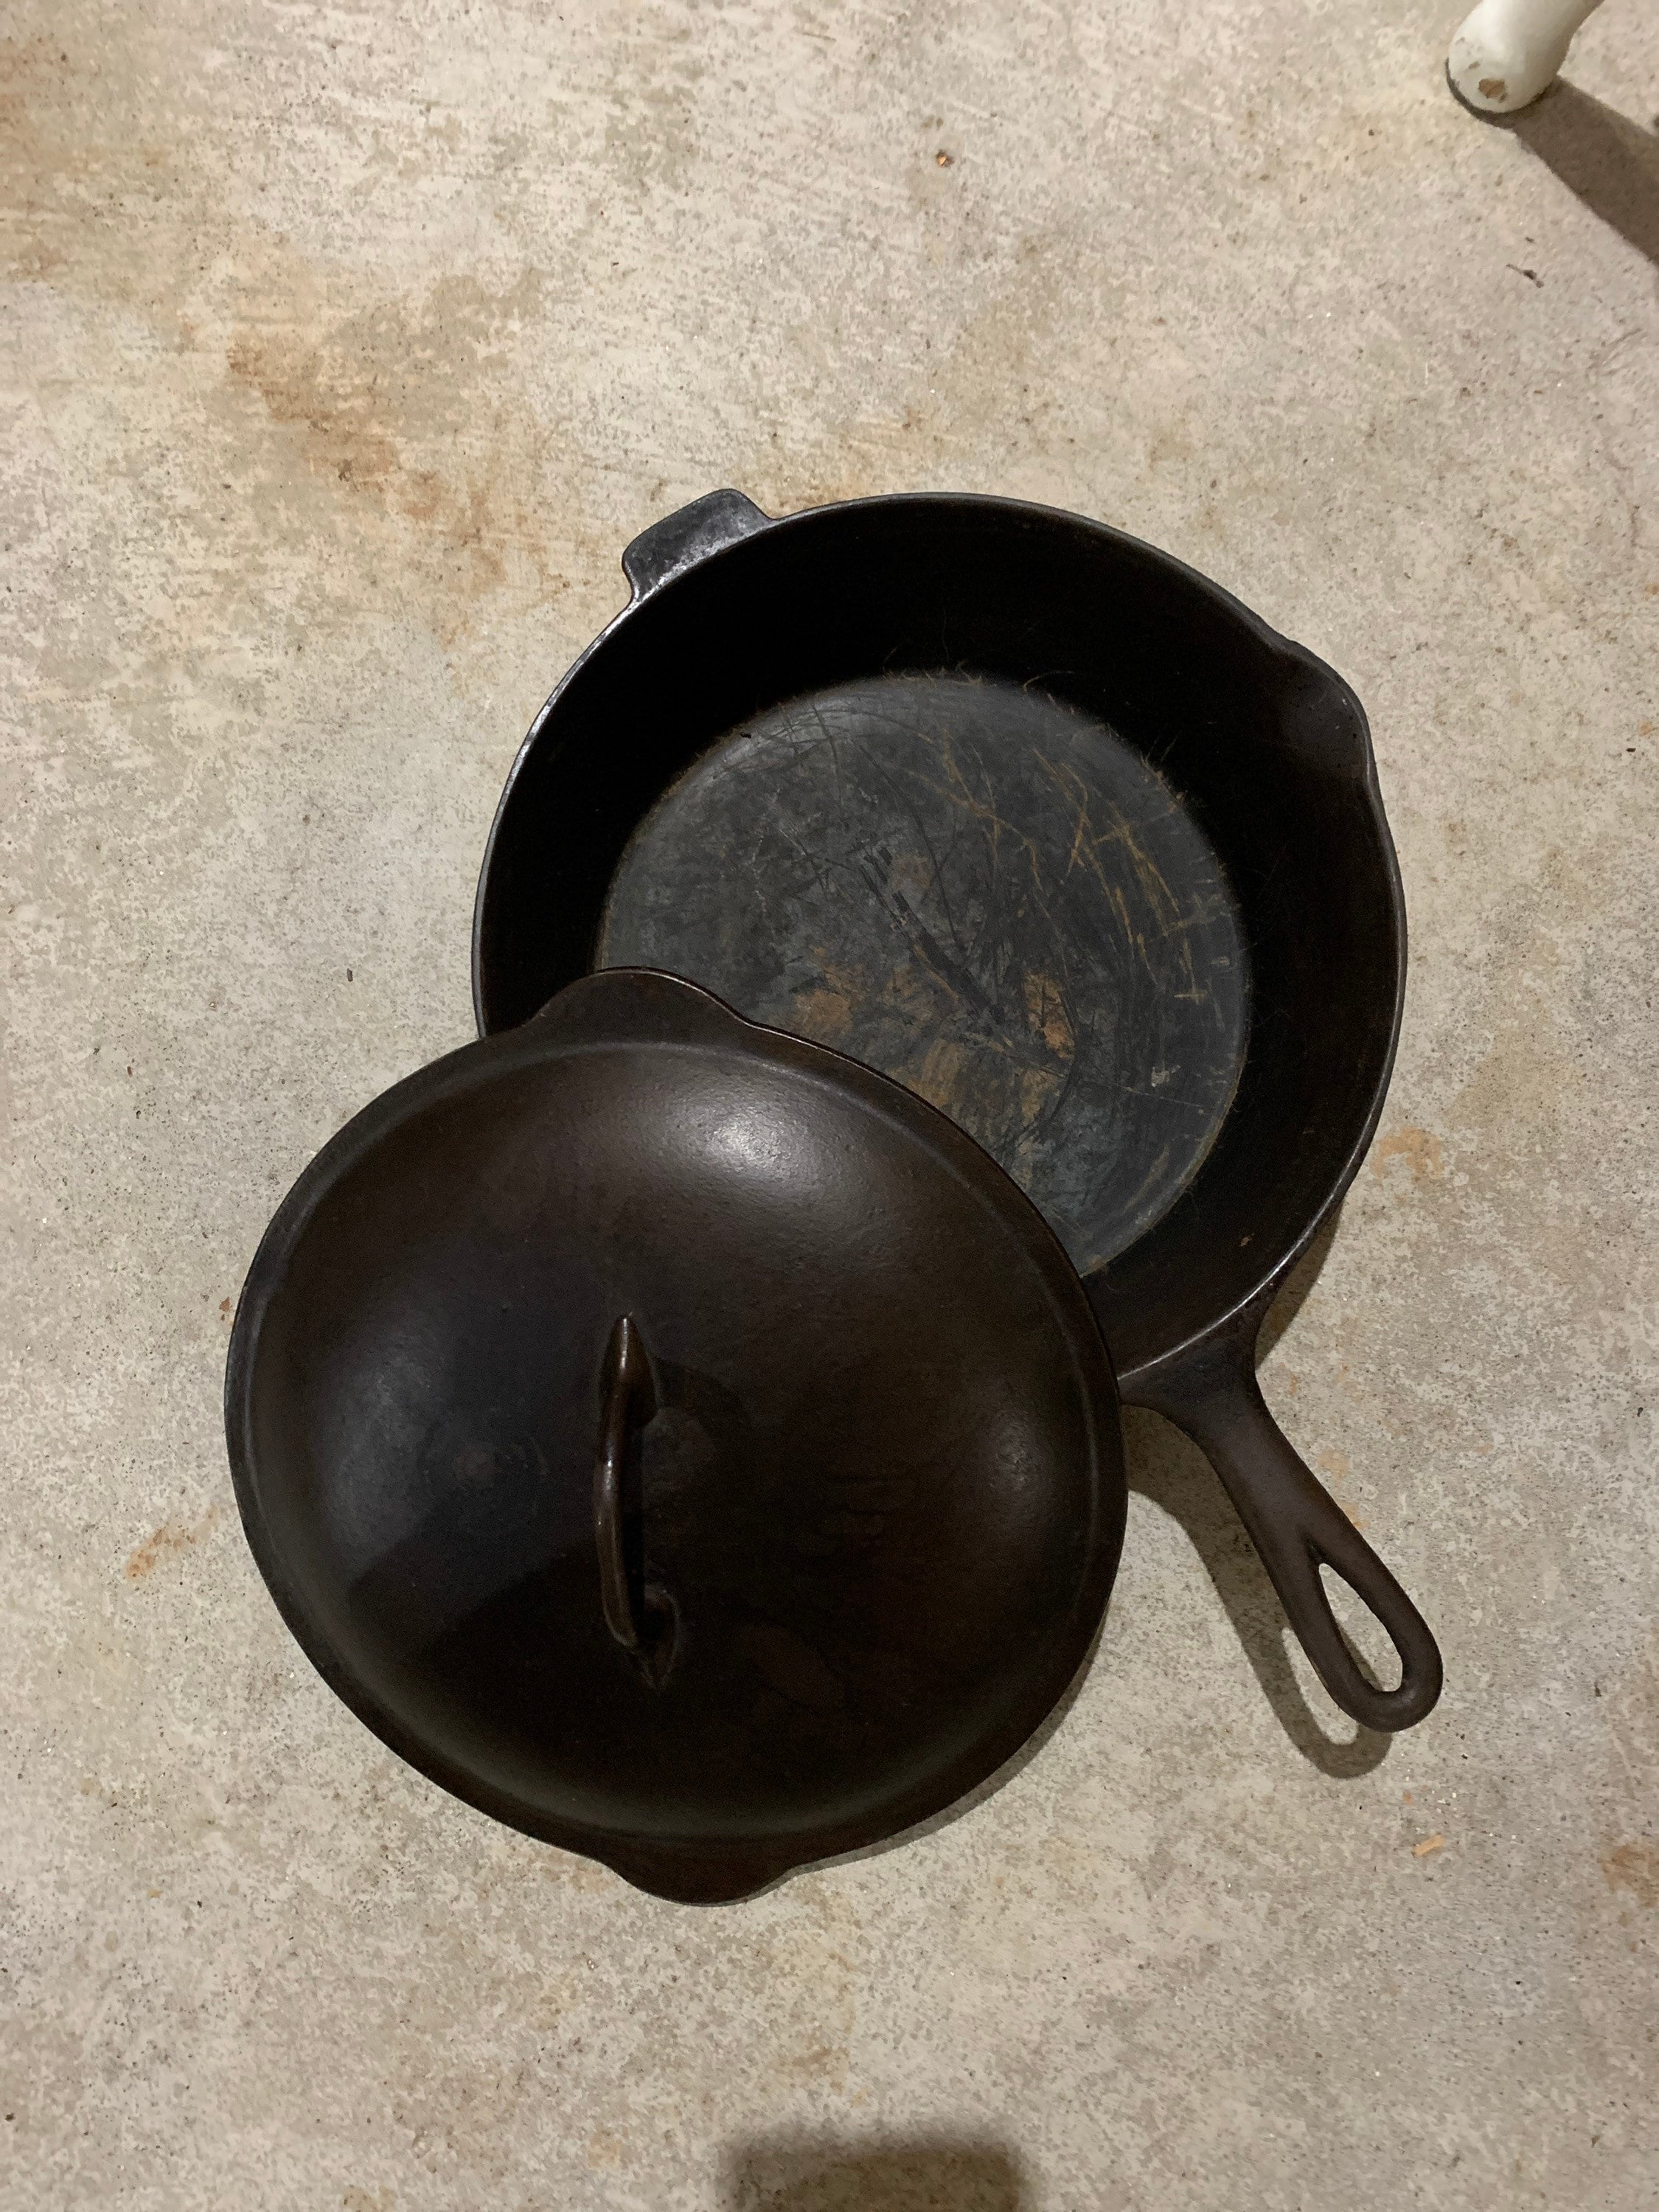 Sold at Auction: Favorite piqua ware cast iron muffin pan #1, EC